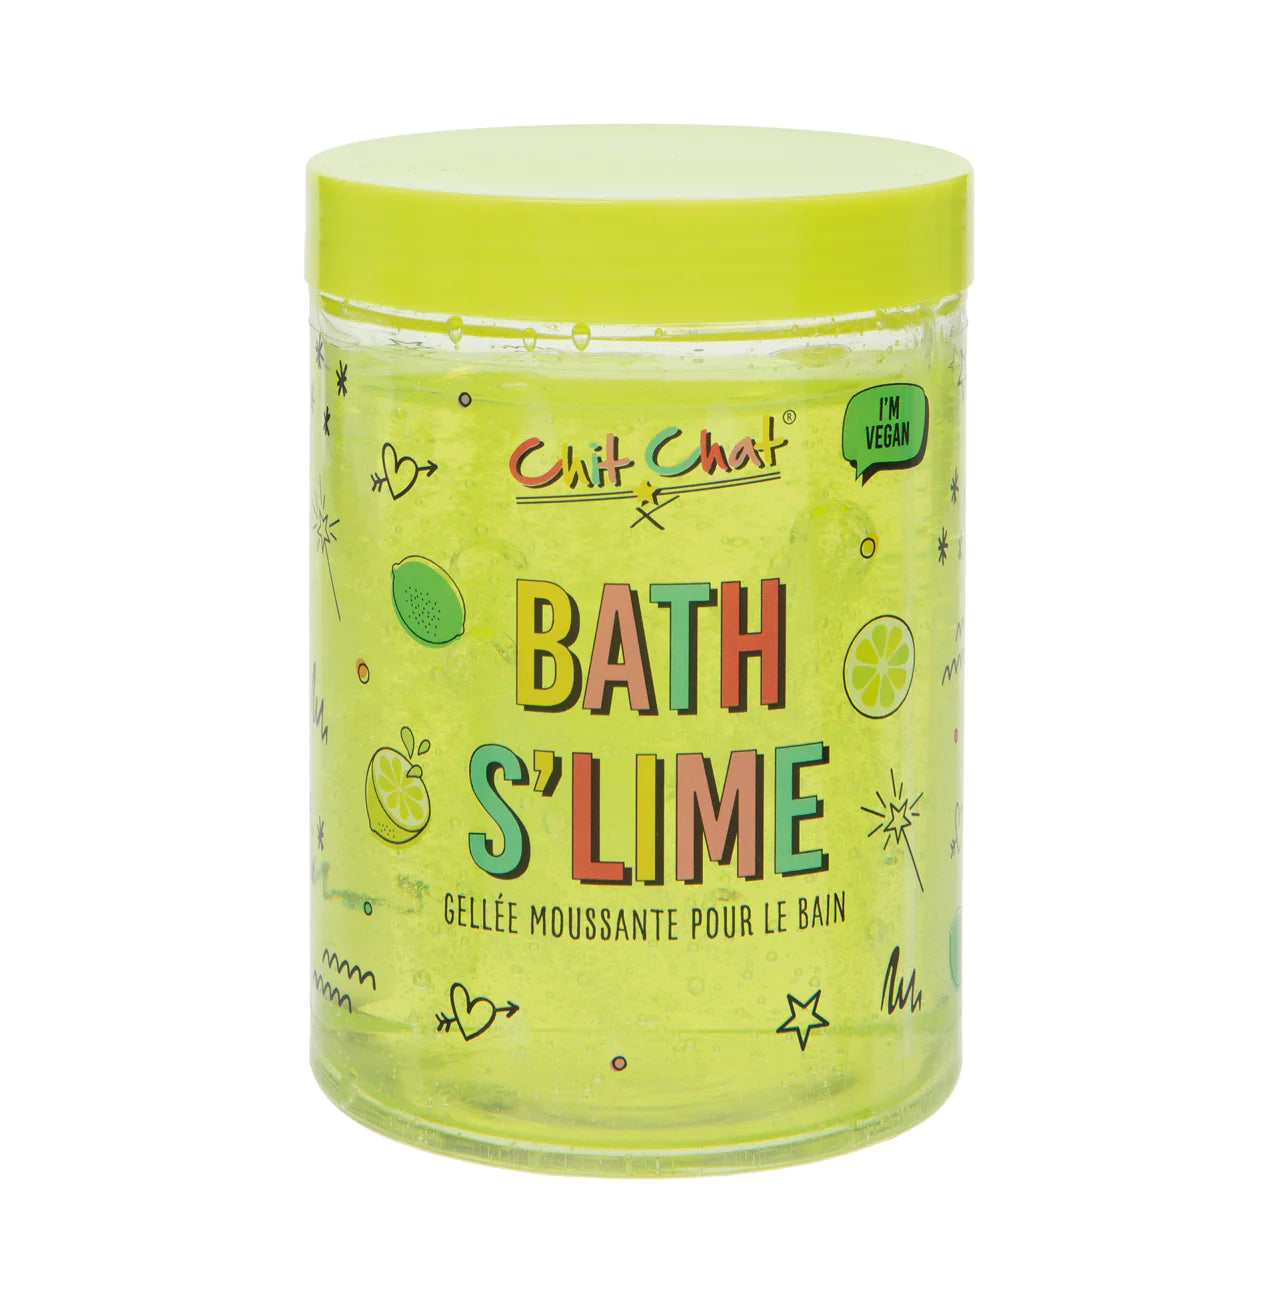 Chit Chat Bath S'lime 500ml